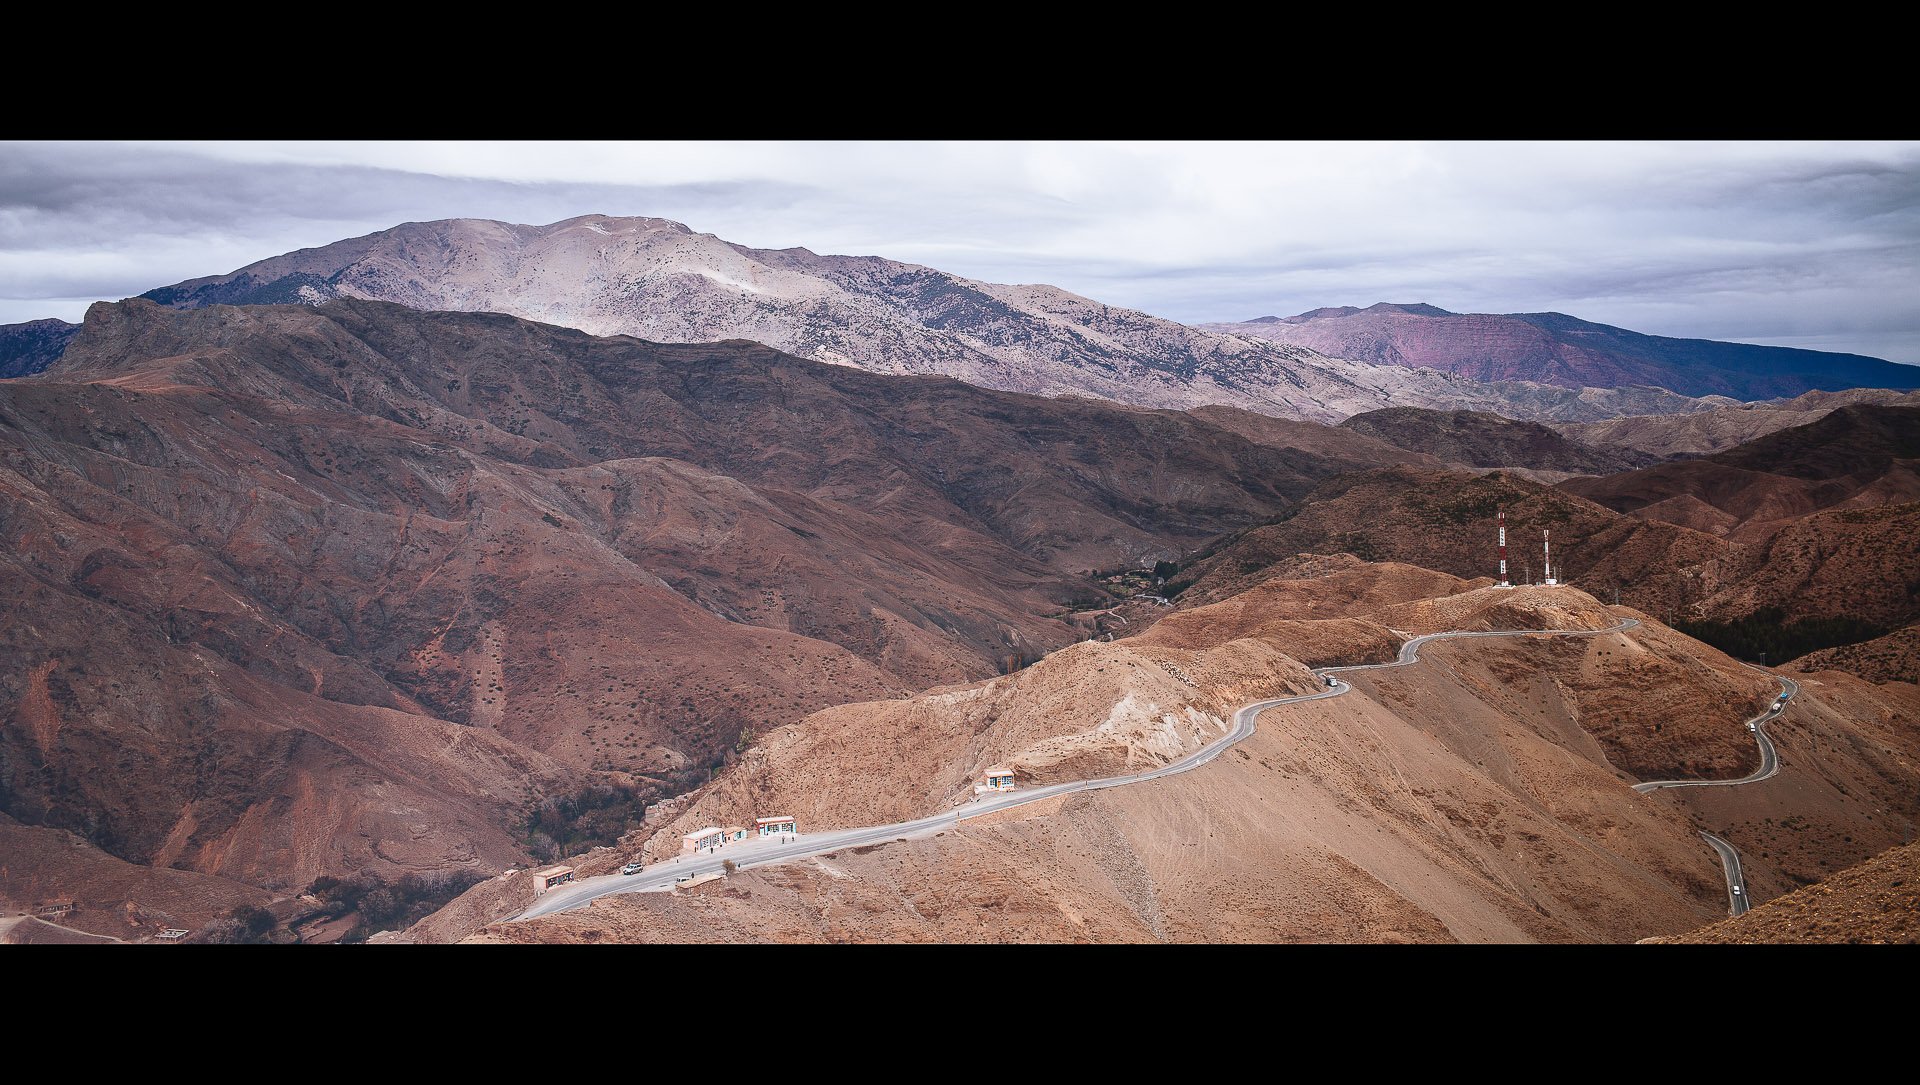 The High Atlas Mountains and the road that connects it to the desert